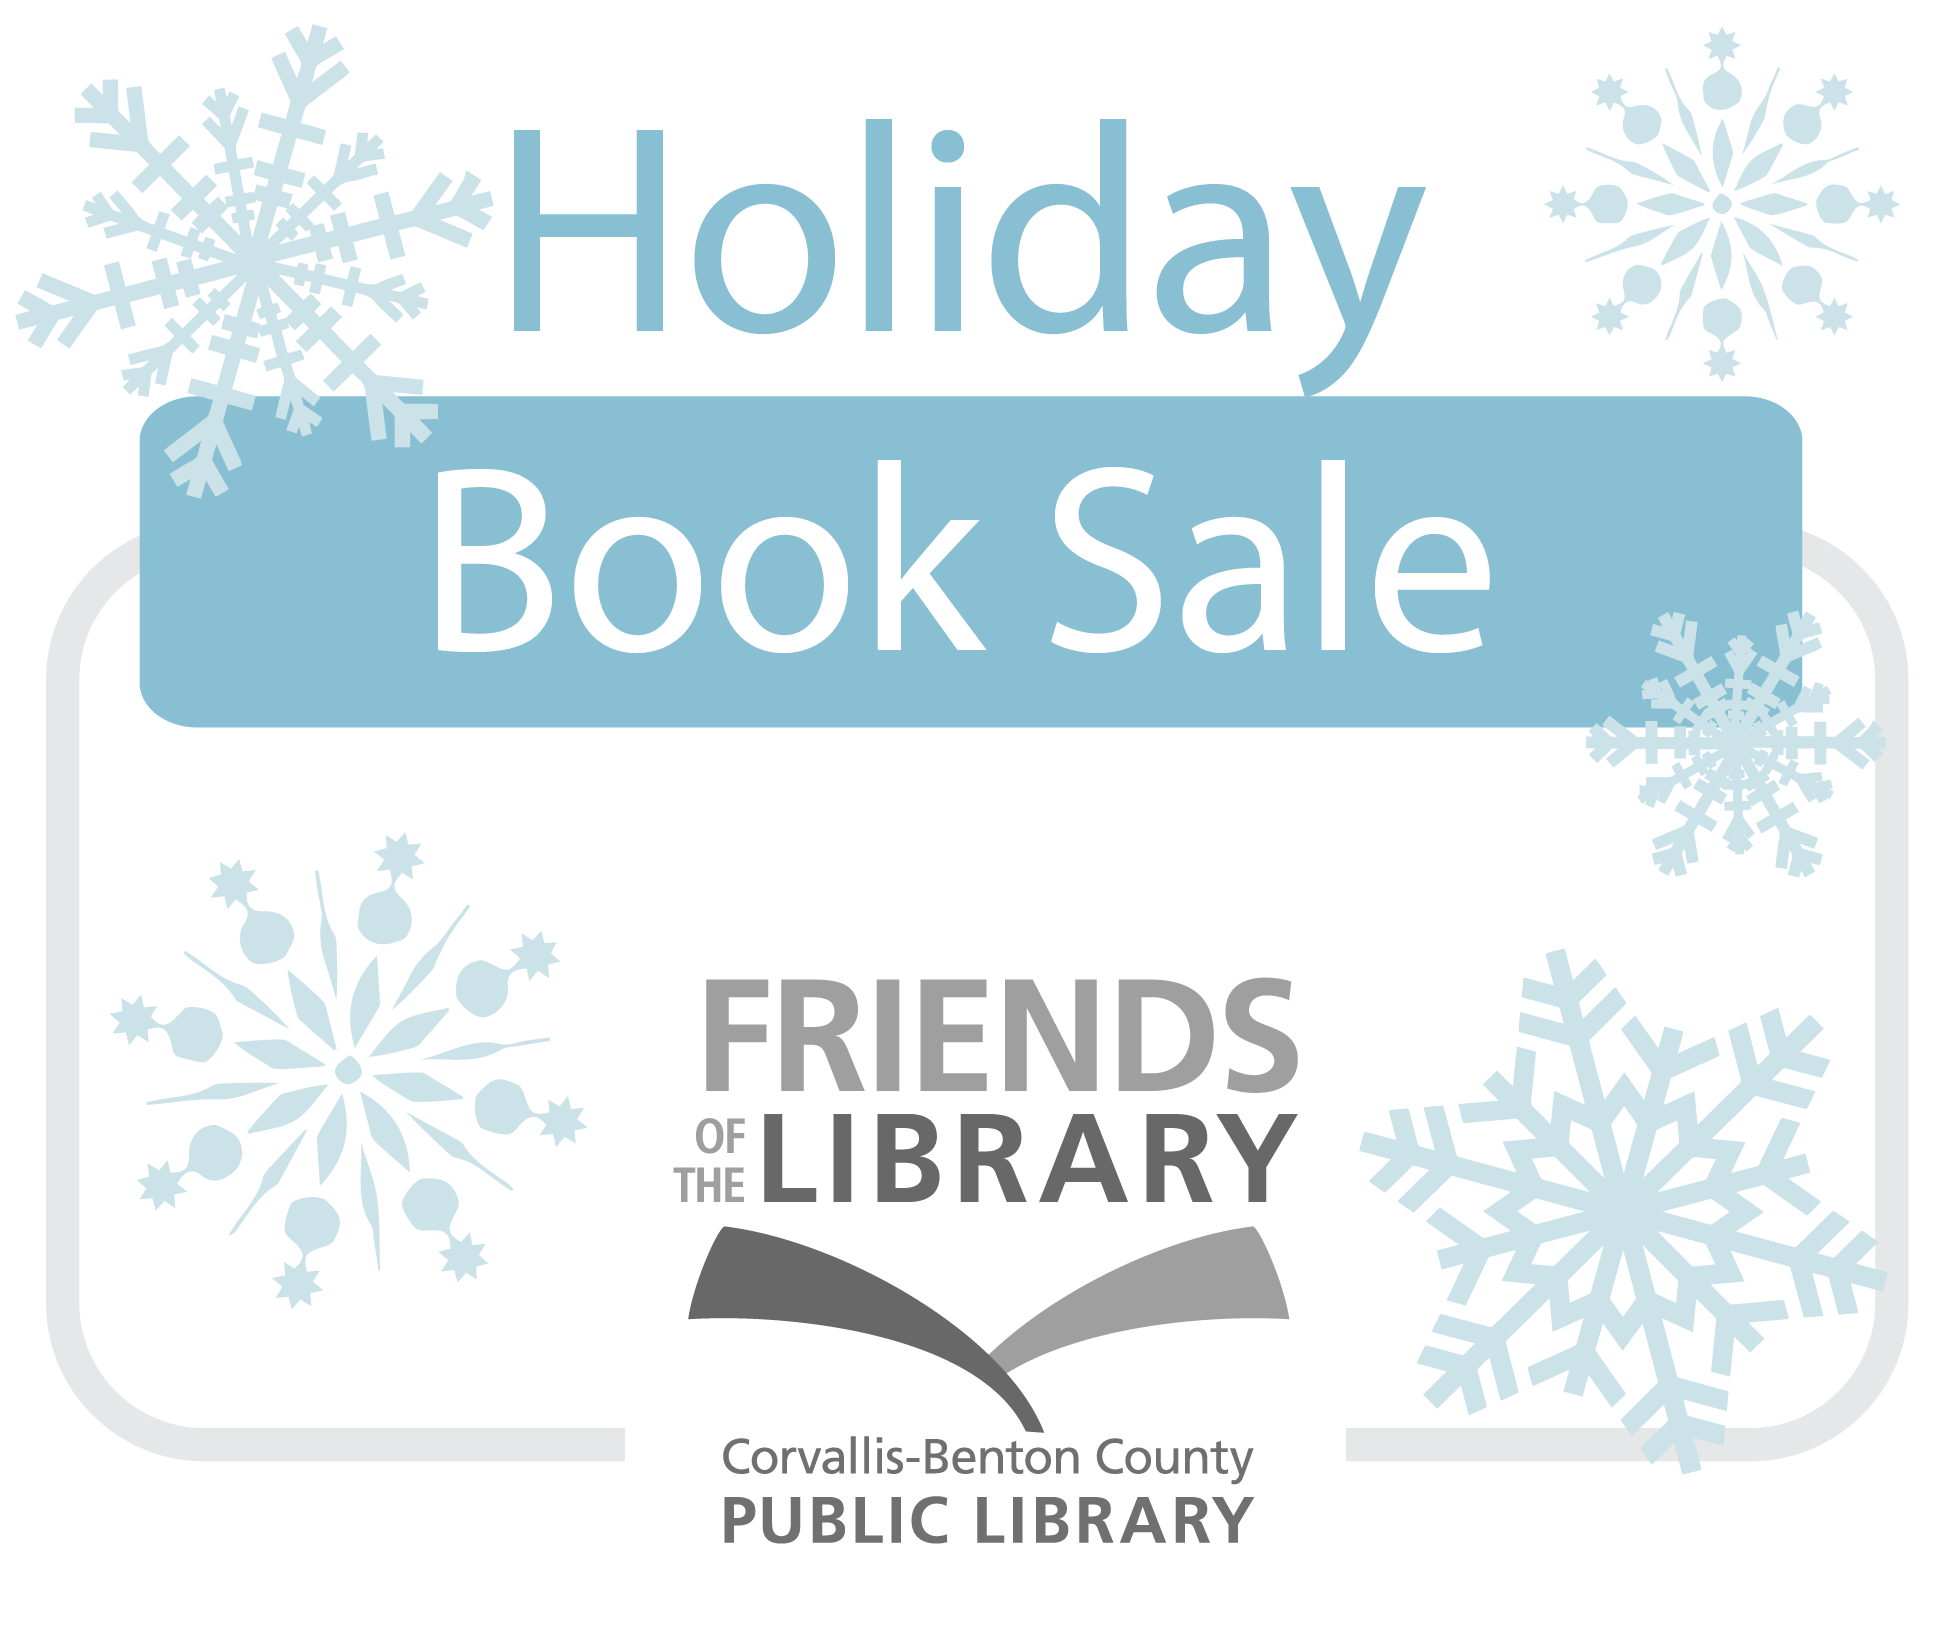 Holiday Book Sale by the Friends of the Library